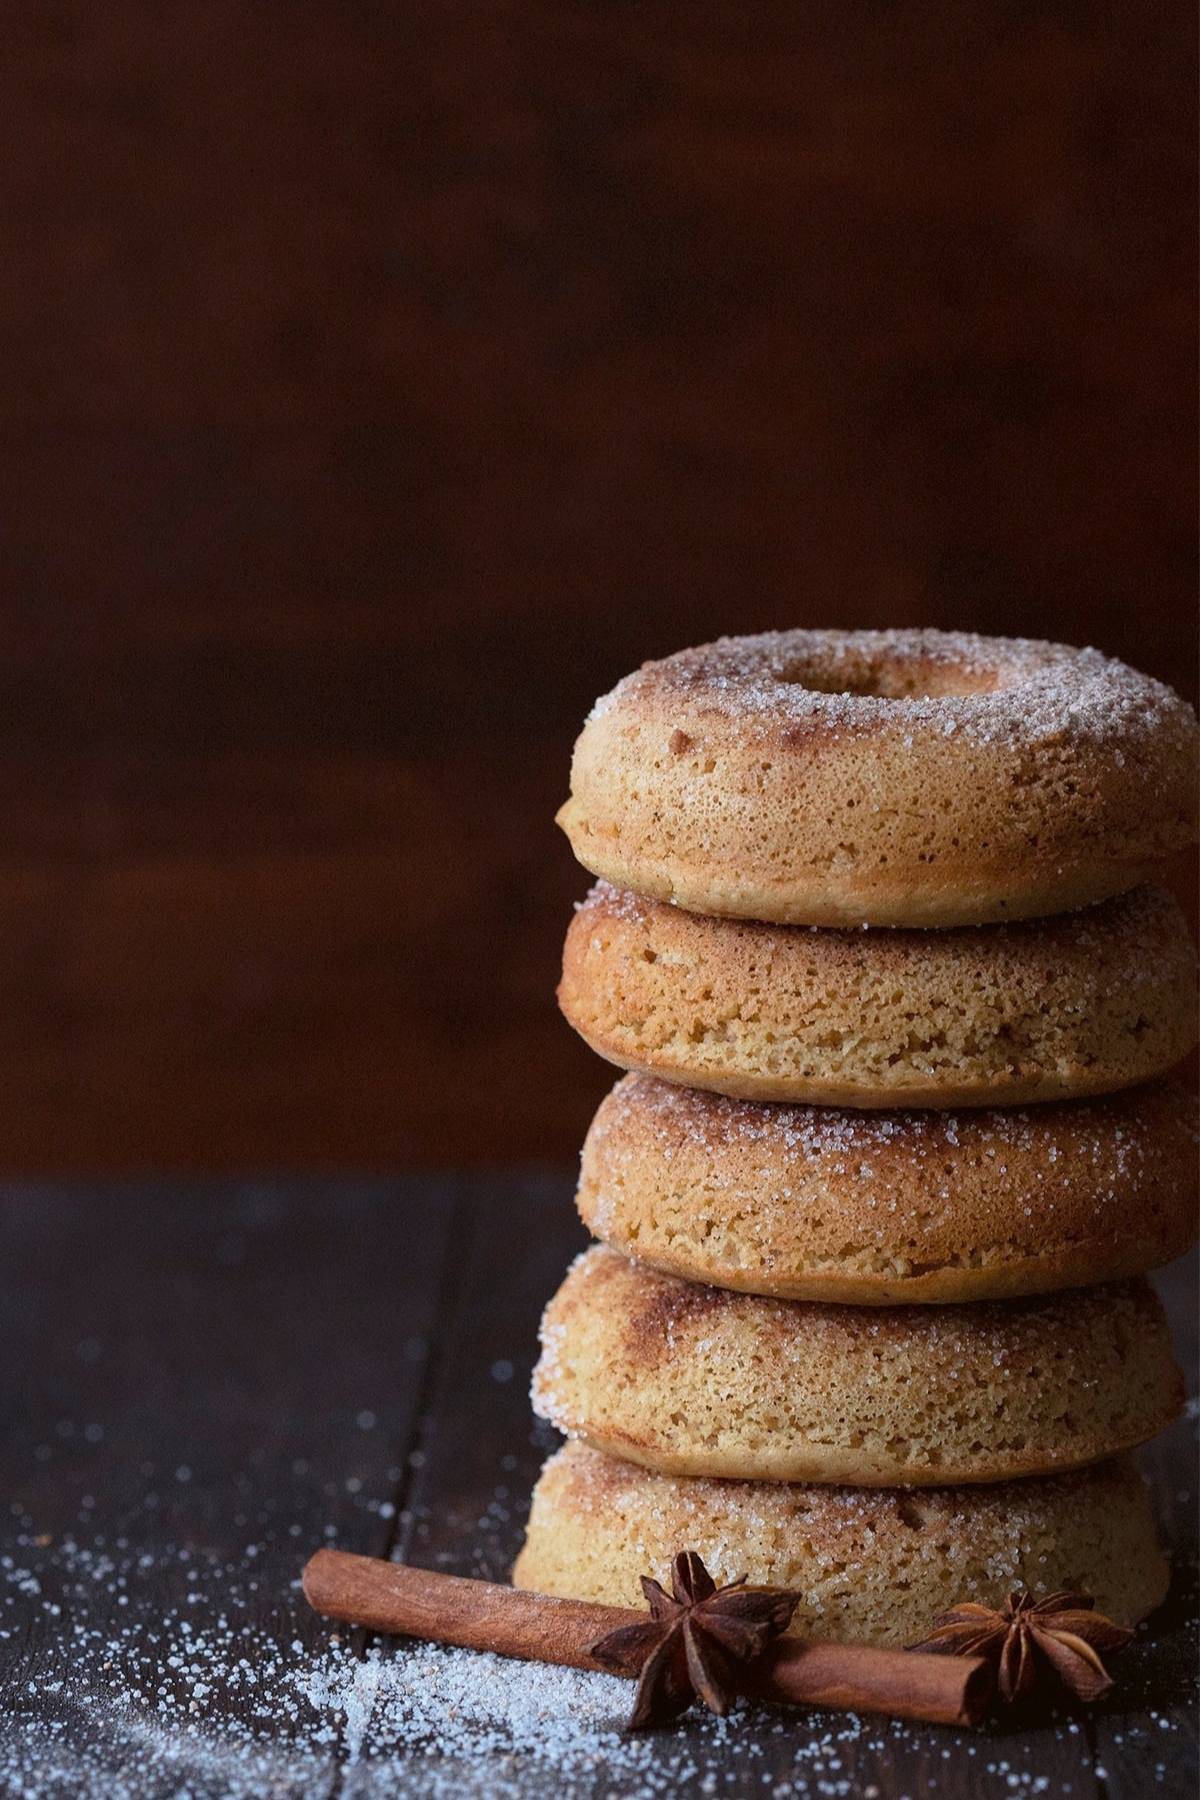 A stack of keto almond flour donuts on a brown wooden table, with cinnamon sticks and star anise around it.